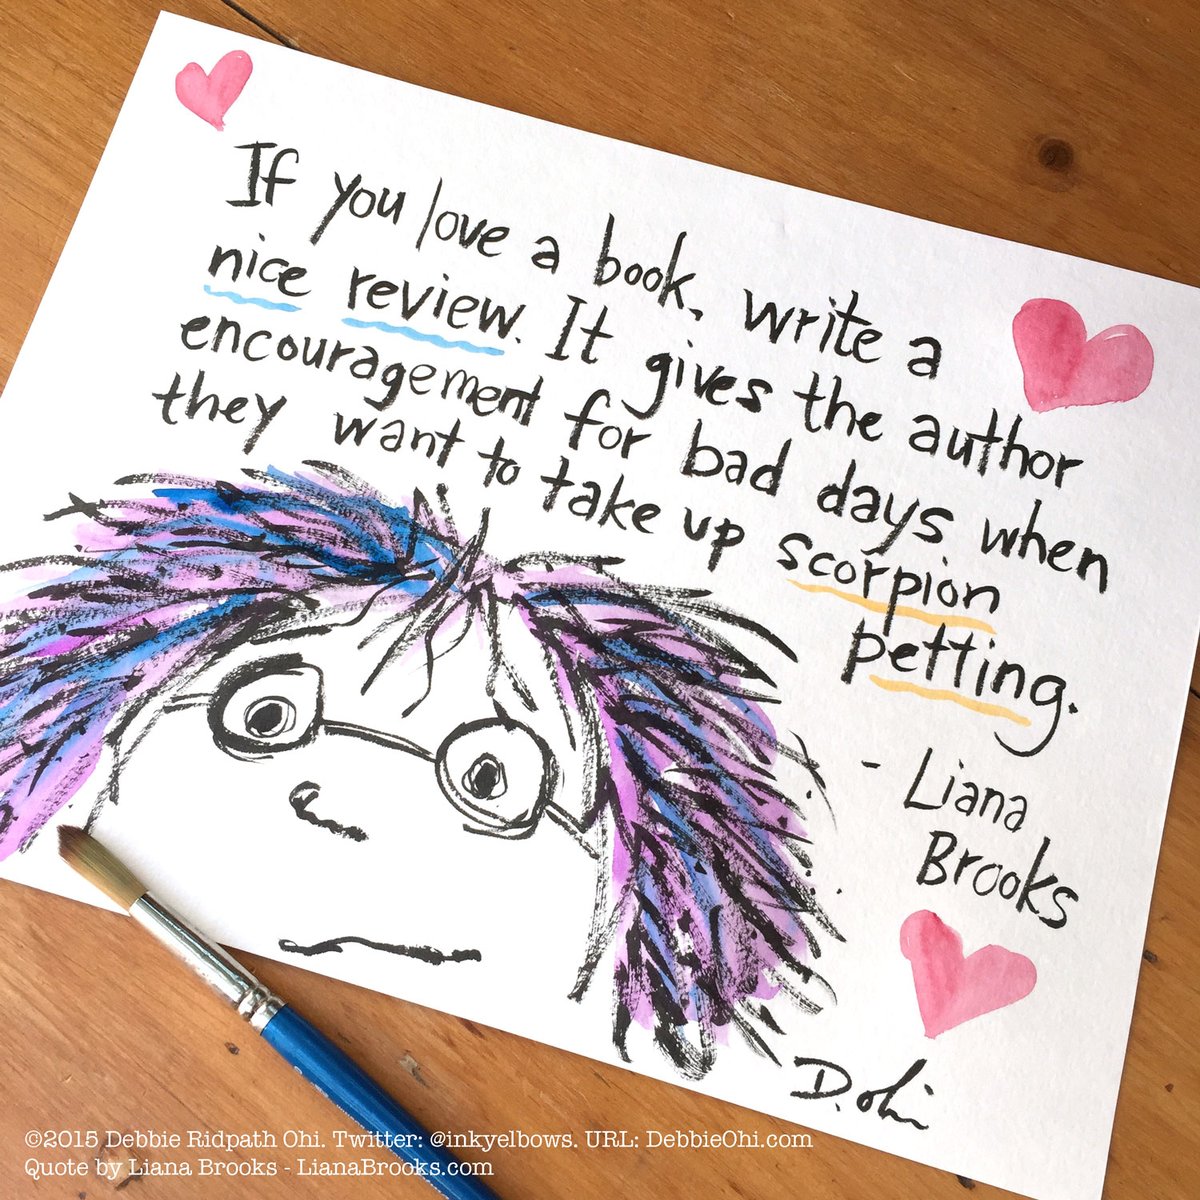 If you love a book, write a nice review. It gives the author encouragement on days they want to take up scorpion petting. - @LianaBrooks p.s. Even a single tweet about a book you like helps! If you can, include cover image & tag the author/illus/publisher.